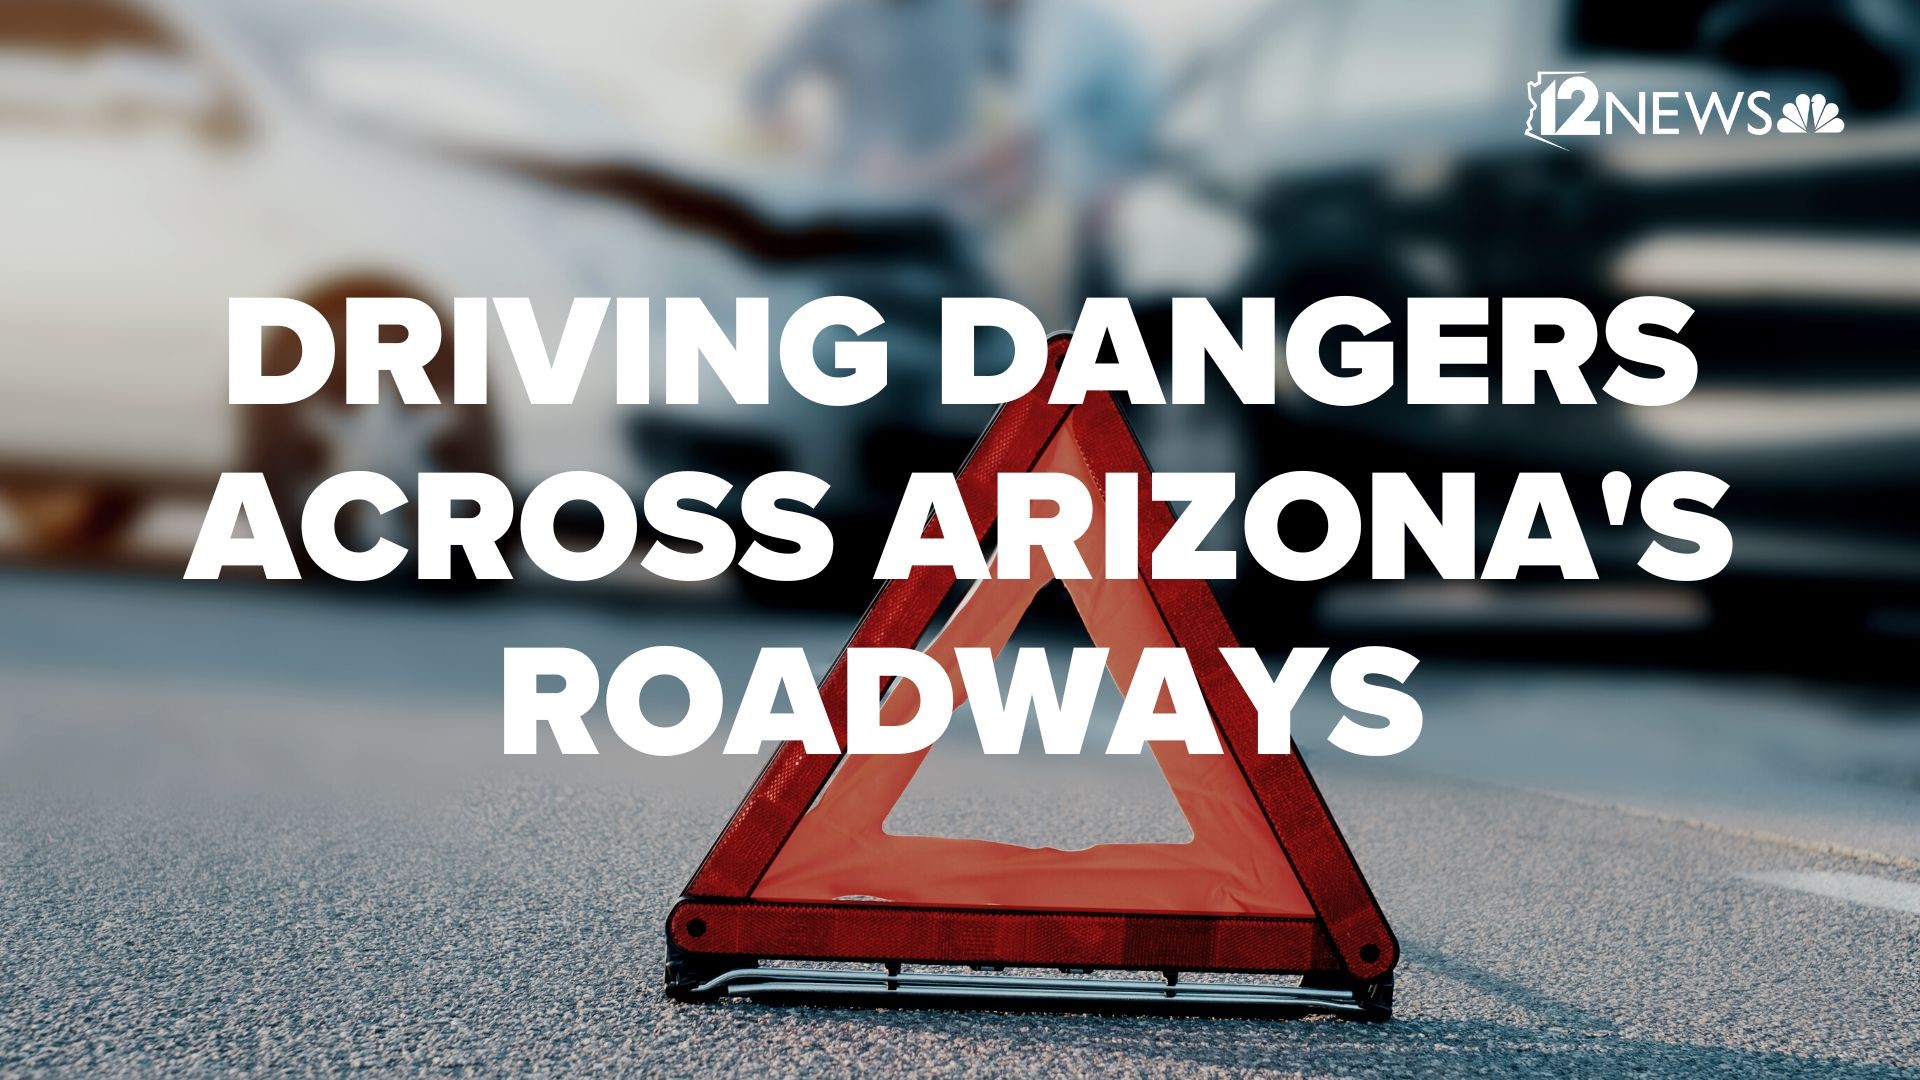 More than 1,000 people died on Arizona roads in 2021, and there are many reasons why our highways are among the most dangerous.